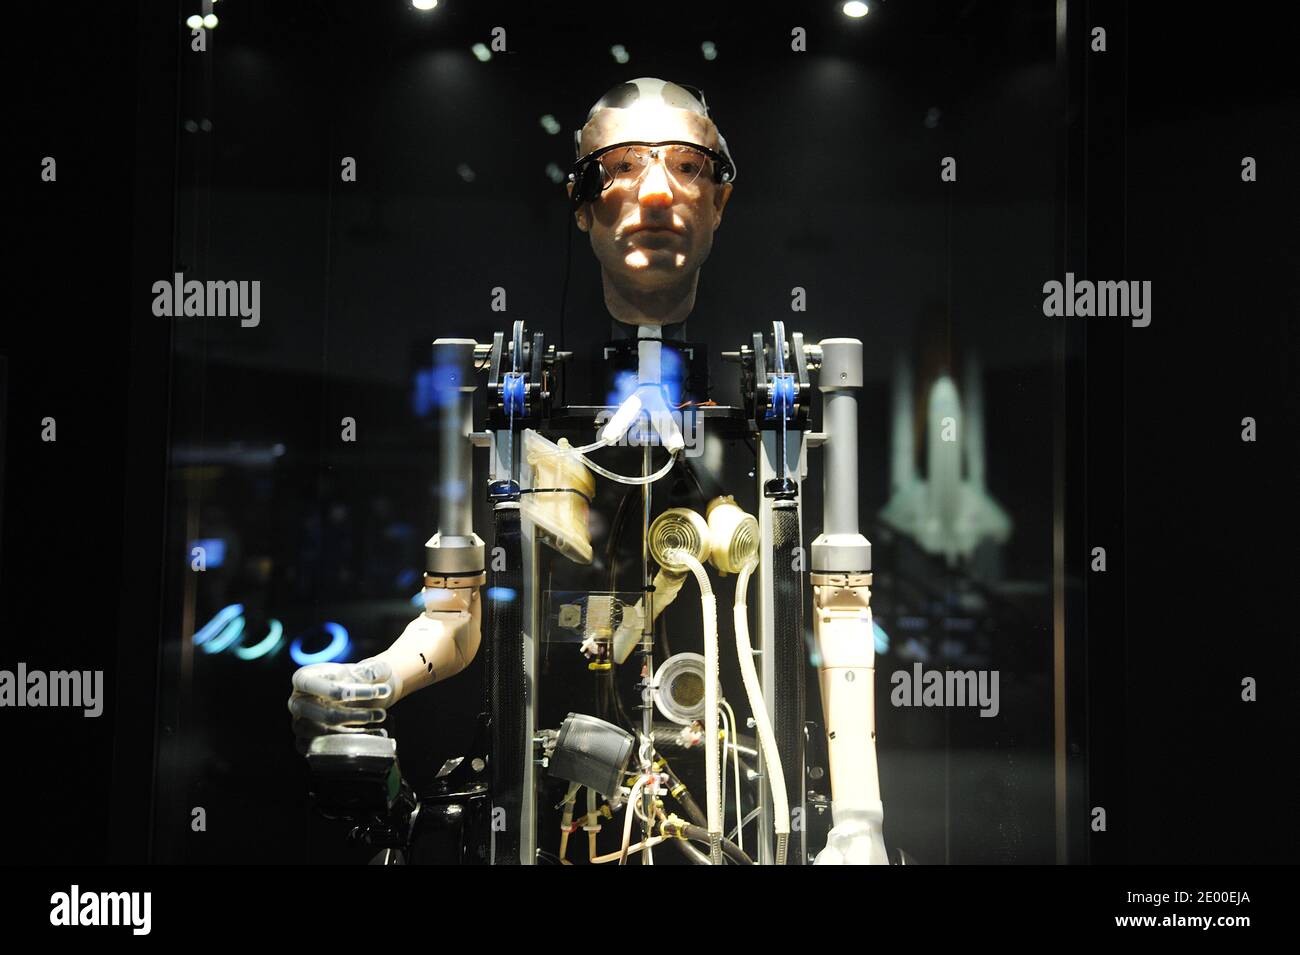 A first-ever walking, talking bionic man stands on display at the Smithsonian National Air and Space Museum in Washington, DC, USA, on Thursday, October 18, 2013. The model is a 6-foot-tall robot built entirely from bionic body parts and implantable synthetic organs.Photo by Olivier Douliery/ABACAPRESS.COM Stock Photo